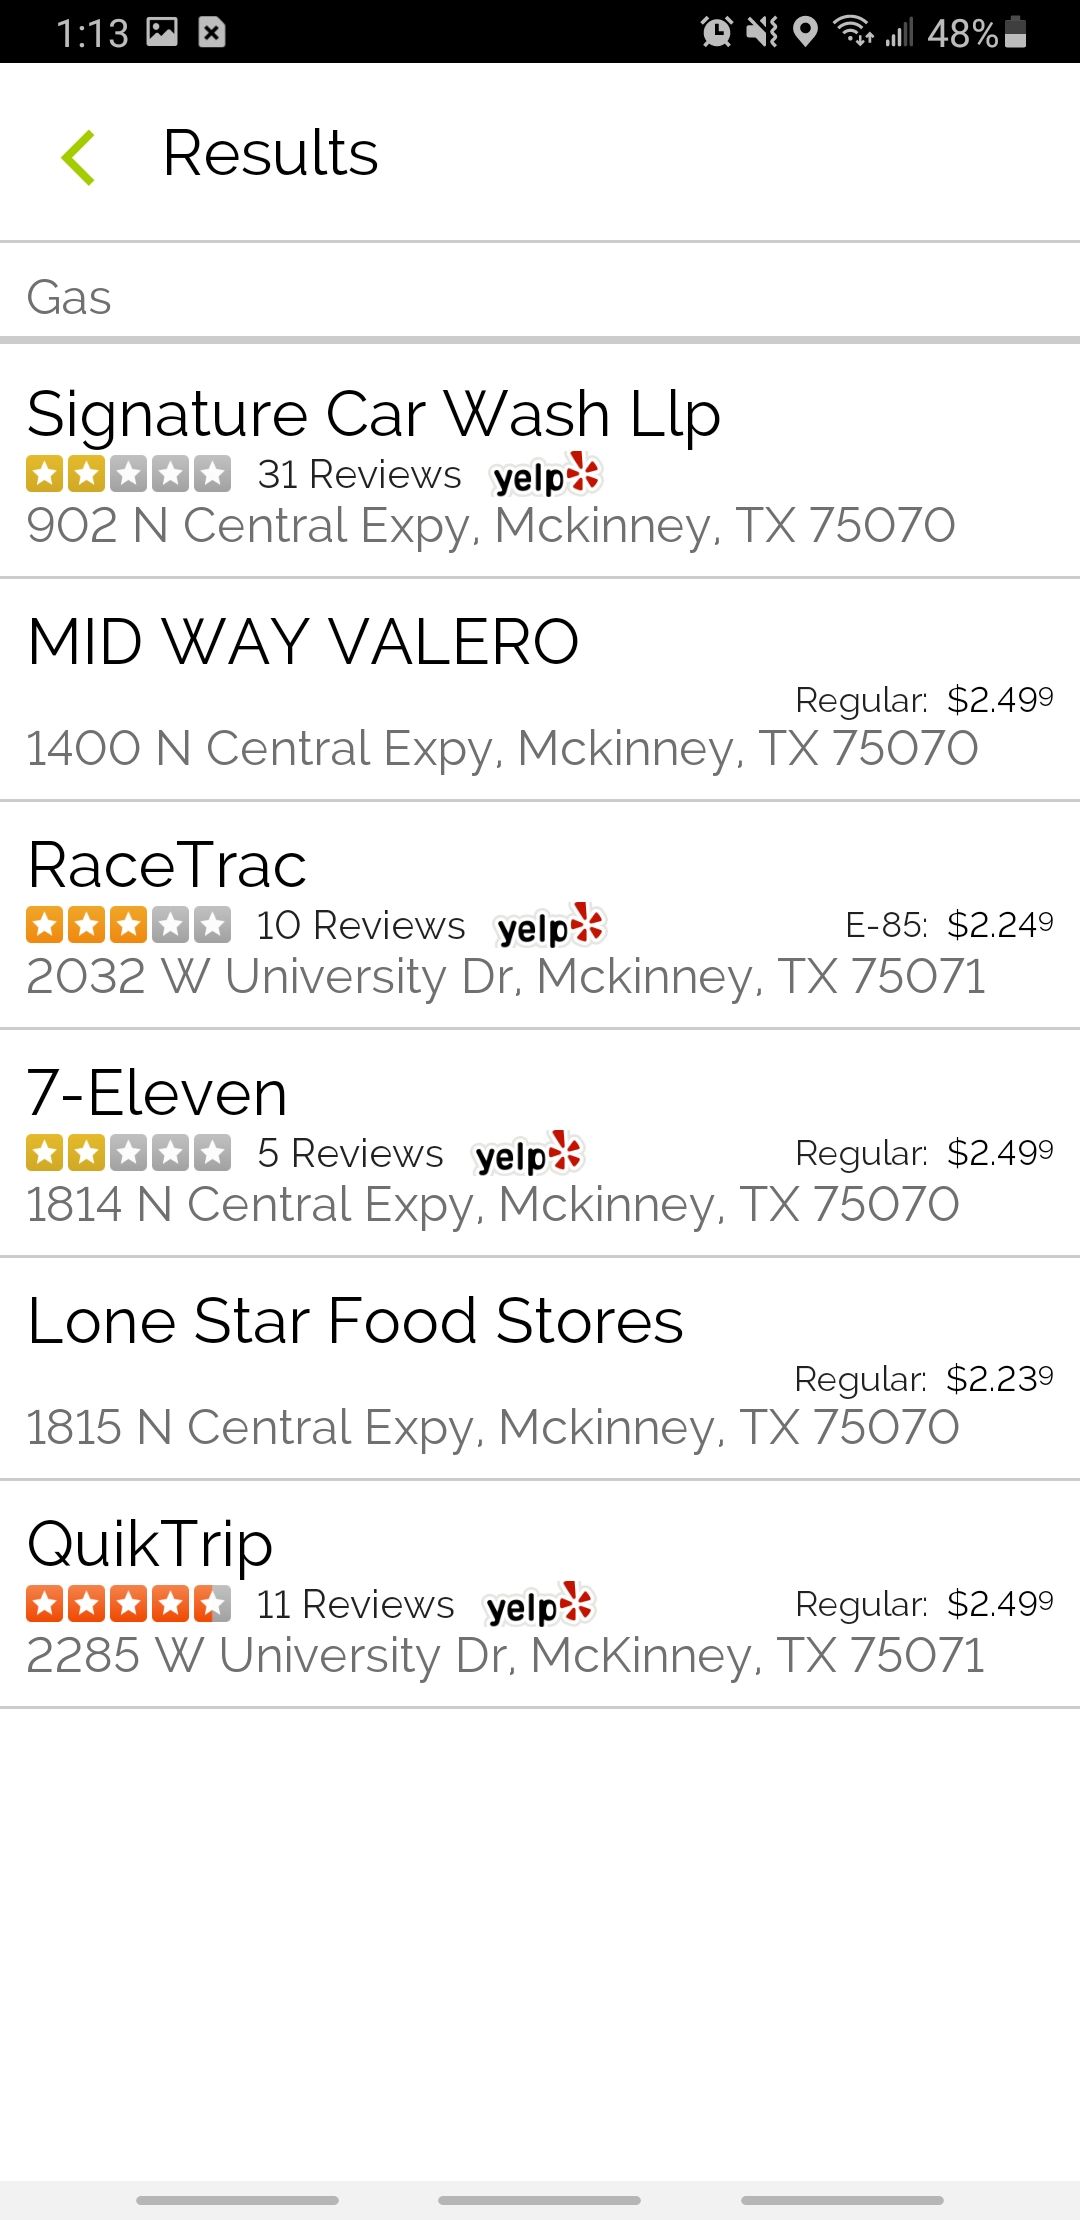 mapquest app page showing nearby gas stations and their prices in list view